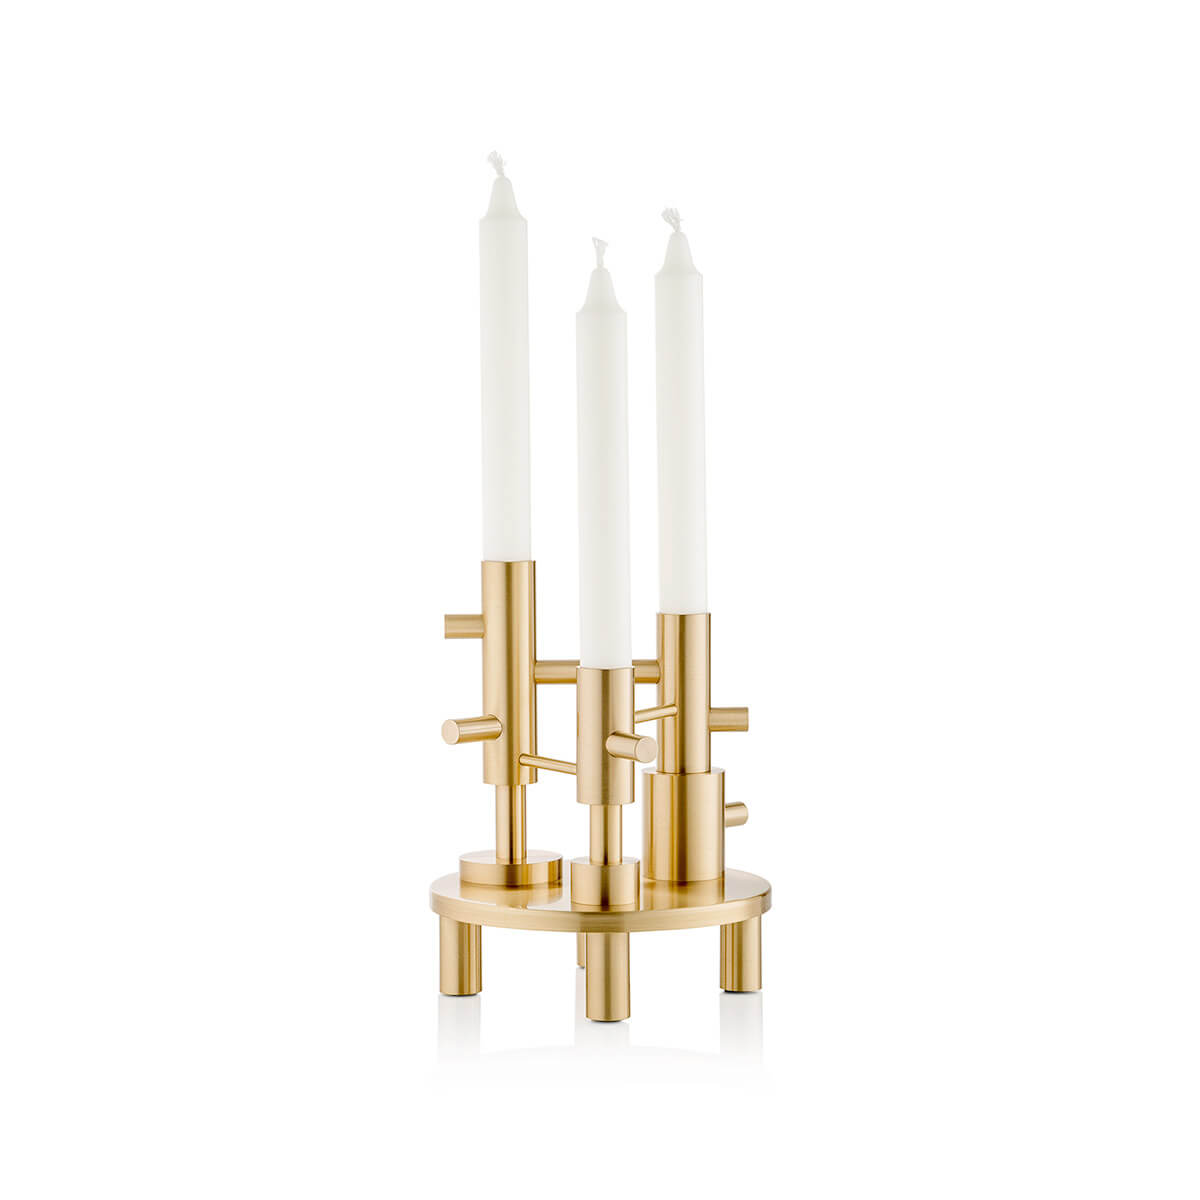 Tall brass taper candle holder set - Collected & Co. : Collected & Co.